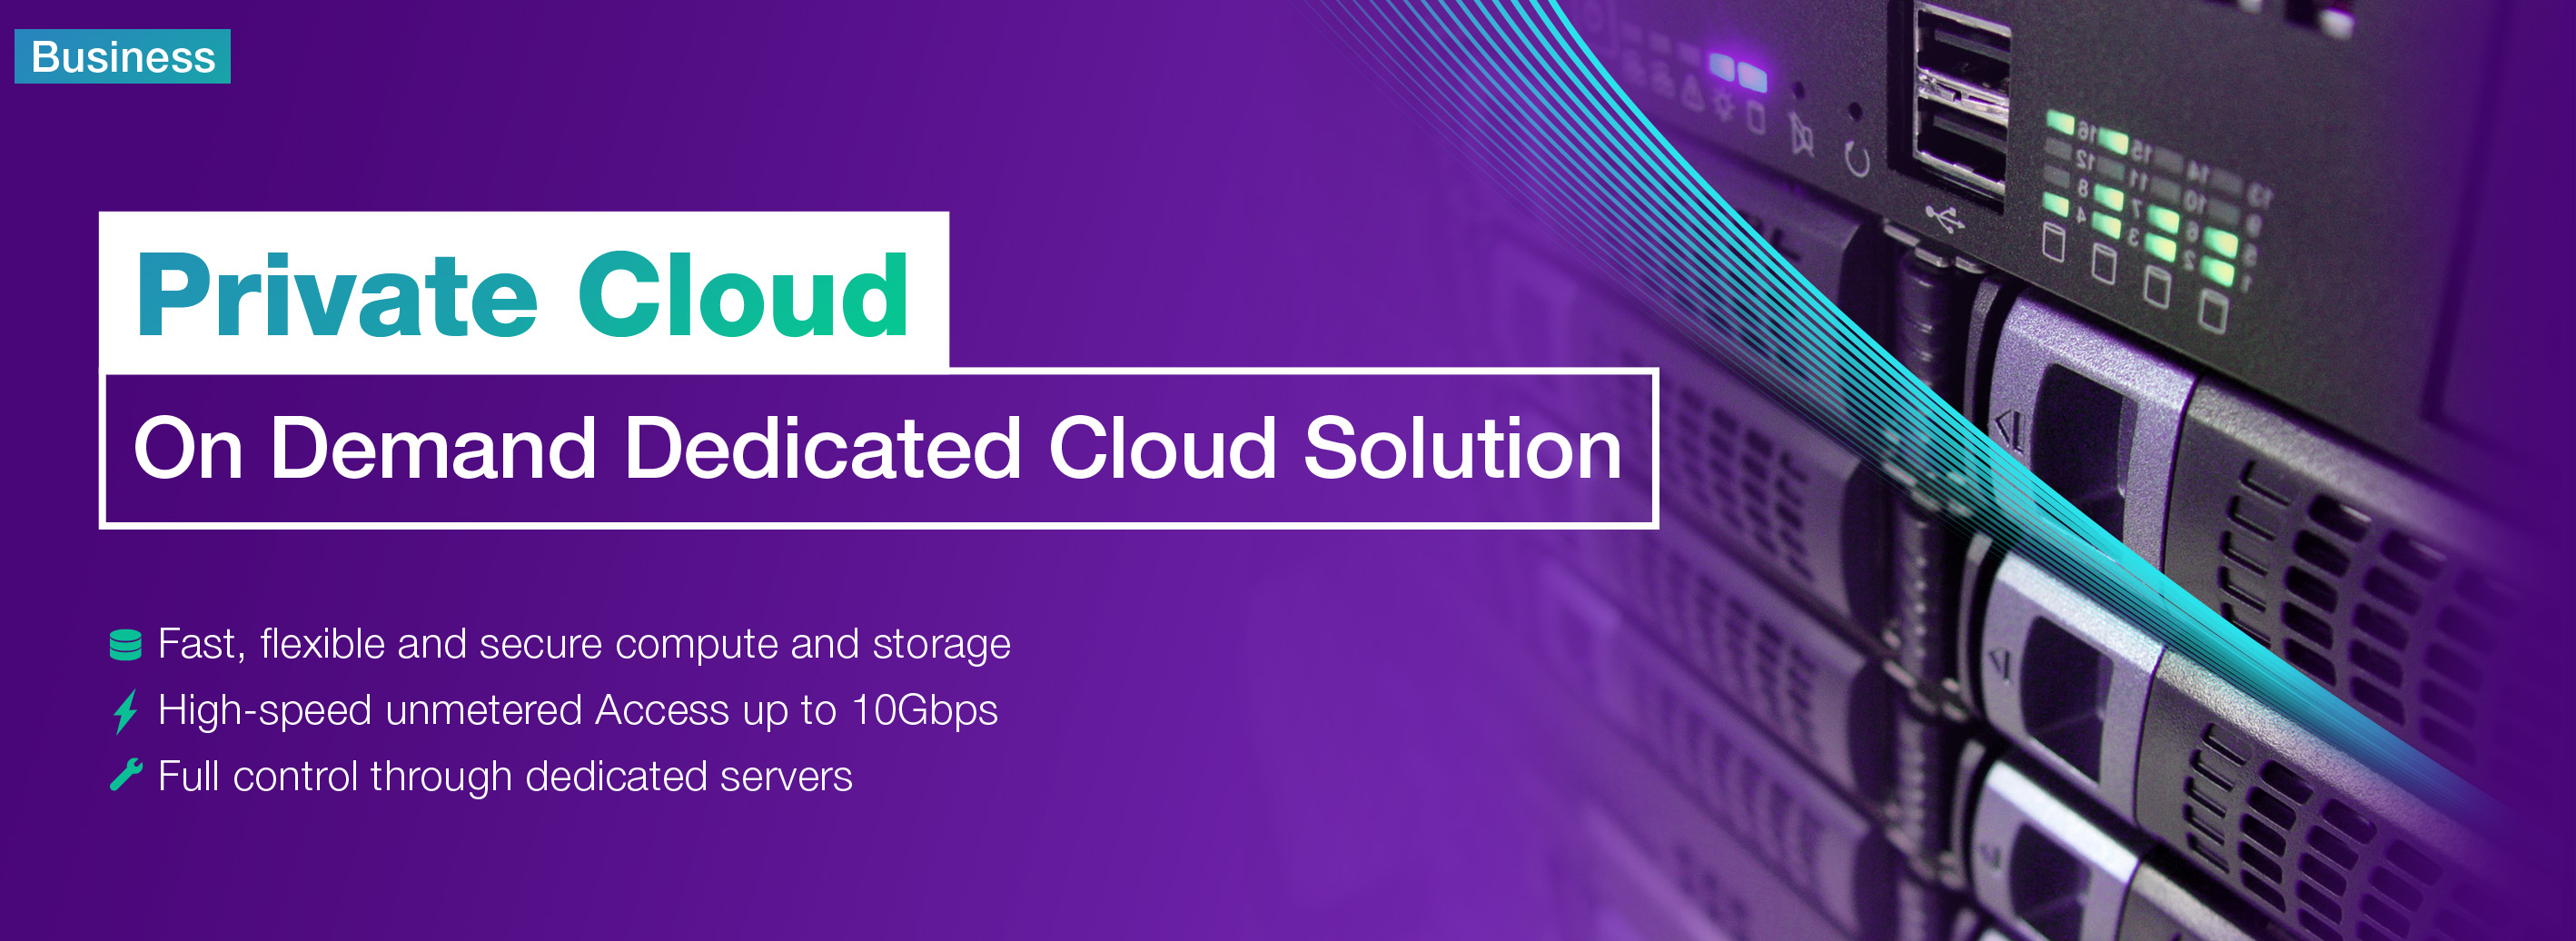 Private Cloud - On Demand Dedicated Cloud Solution